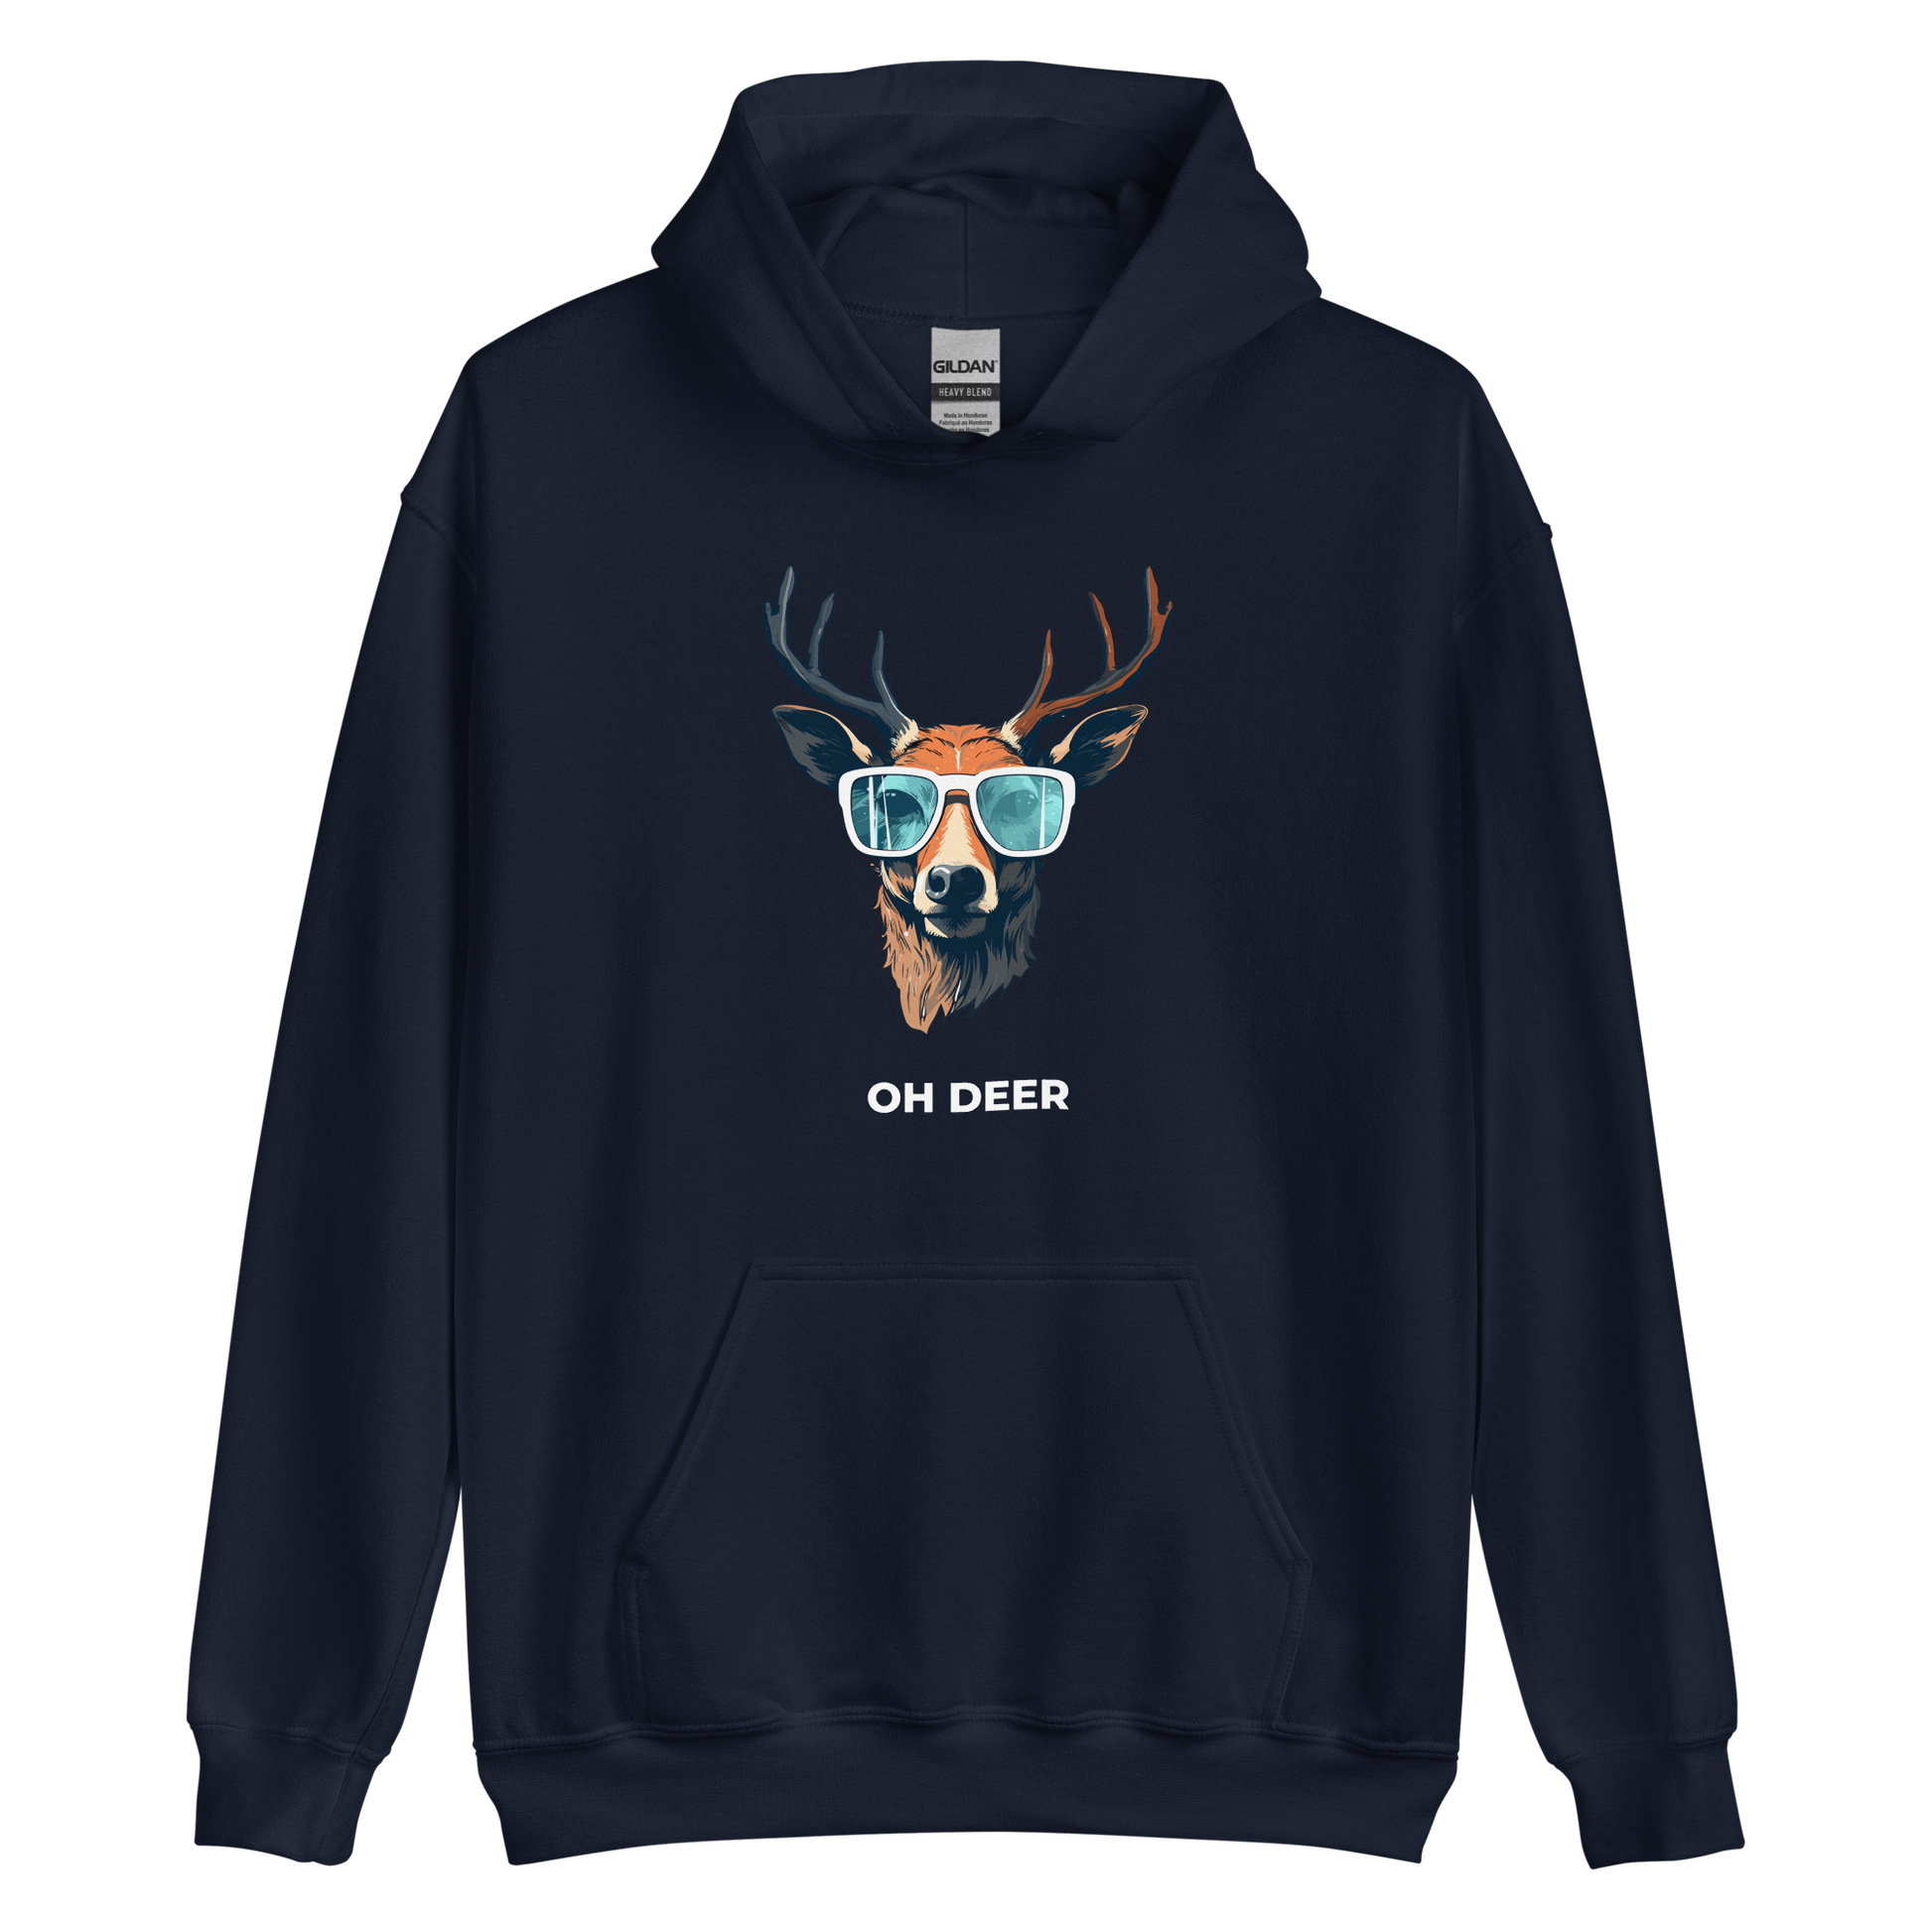 Navy Deer Hoodie featuring a hilarious Oh Deer graphic on the chest - Funny Graphic Deer Hoodies - Boozy Fox